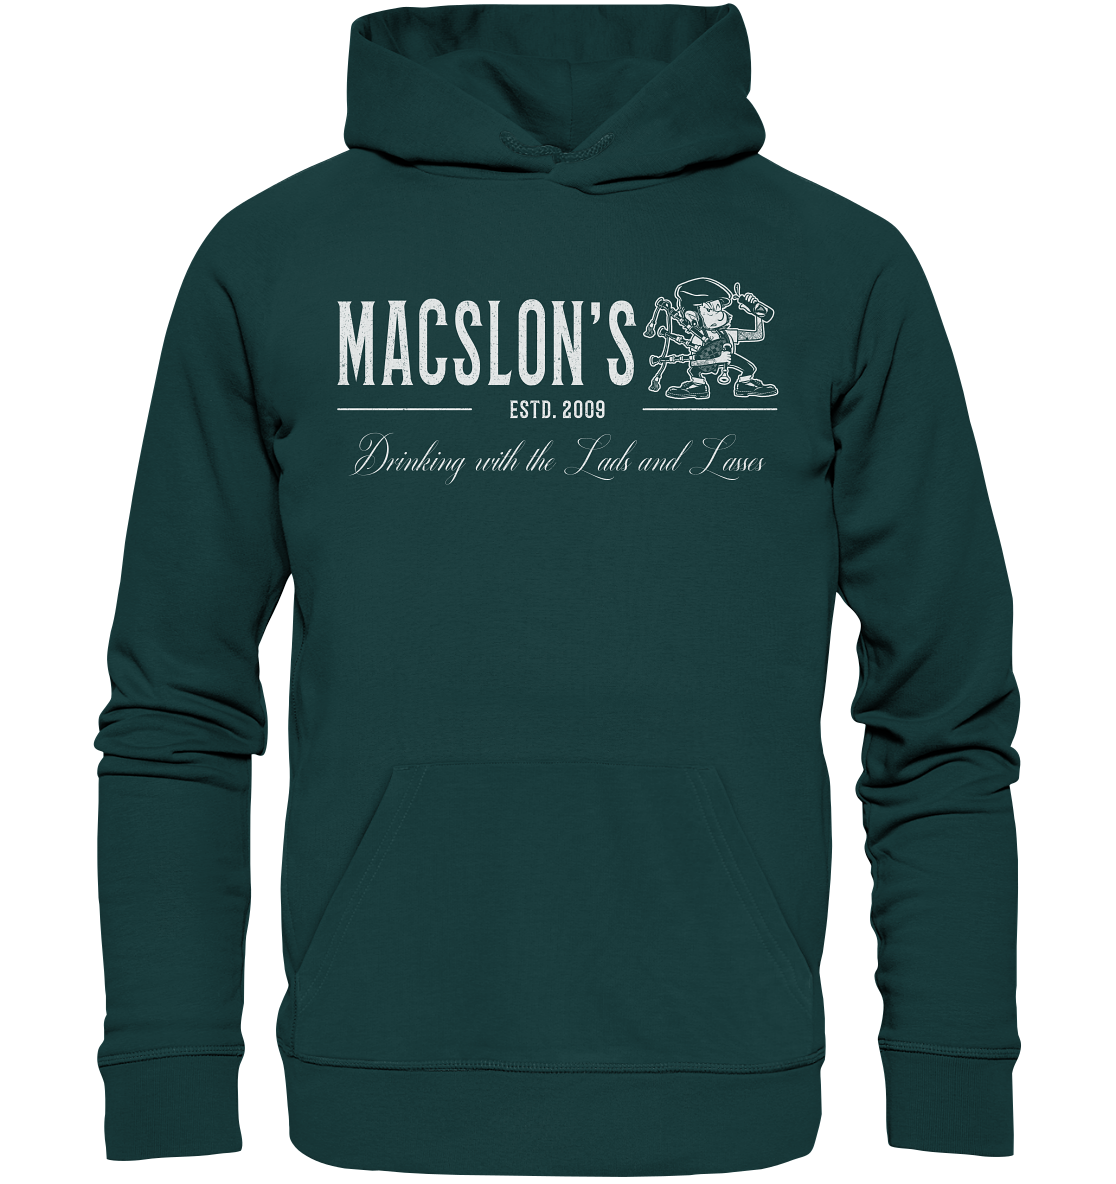 MacSlon's "Drinking With The Lads & Lasses" - Organic Hoodie